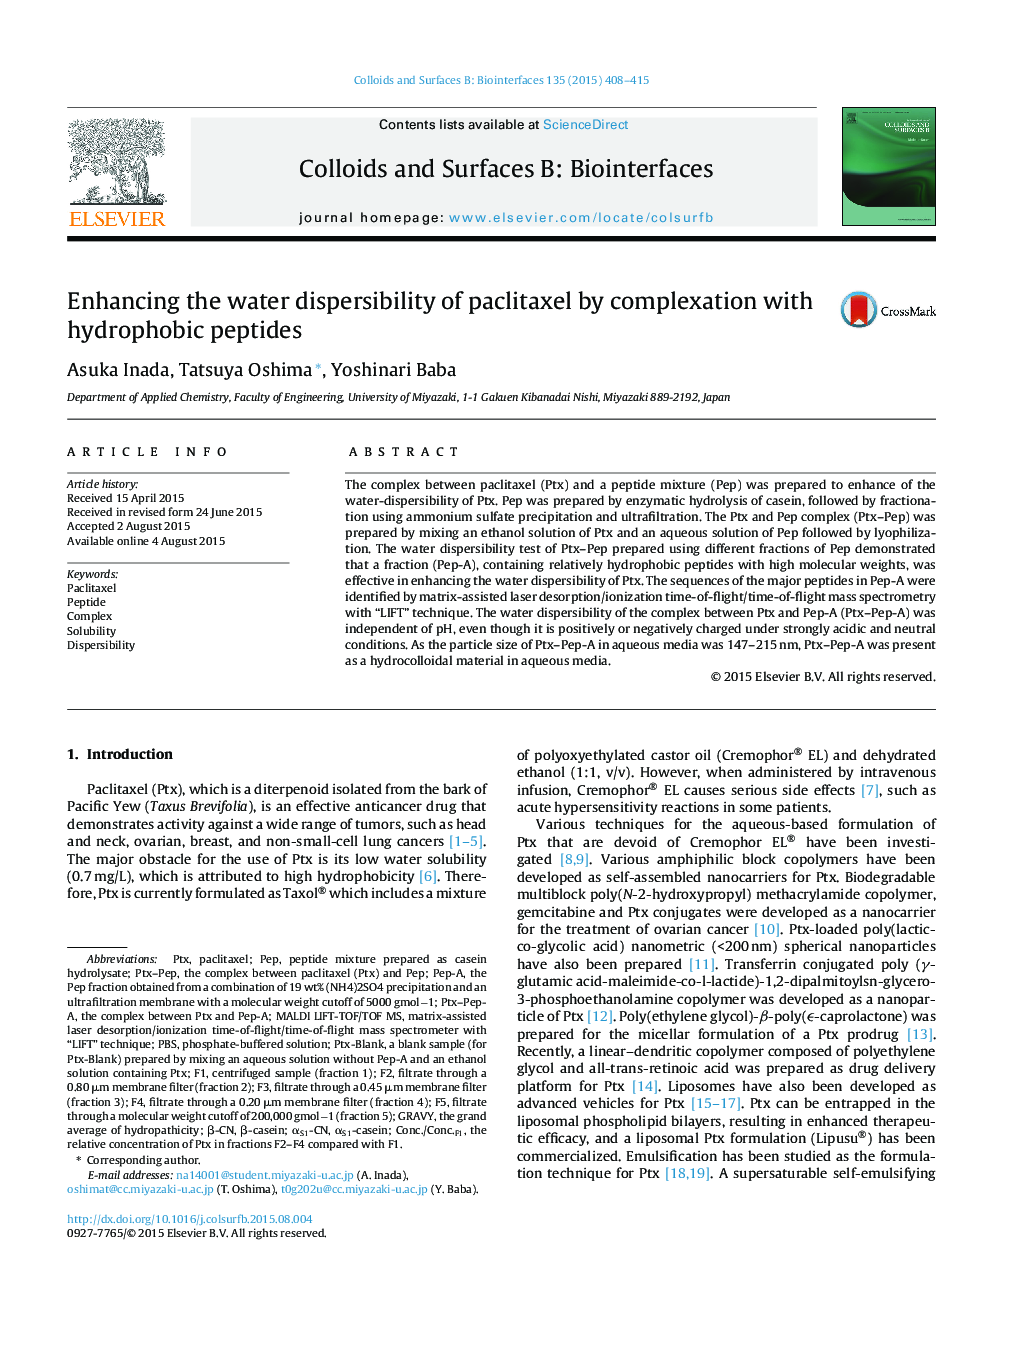 Enhancing the water dispersibility of paclitaxel by complexation with hydrophobic peptides